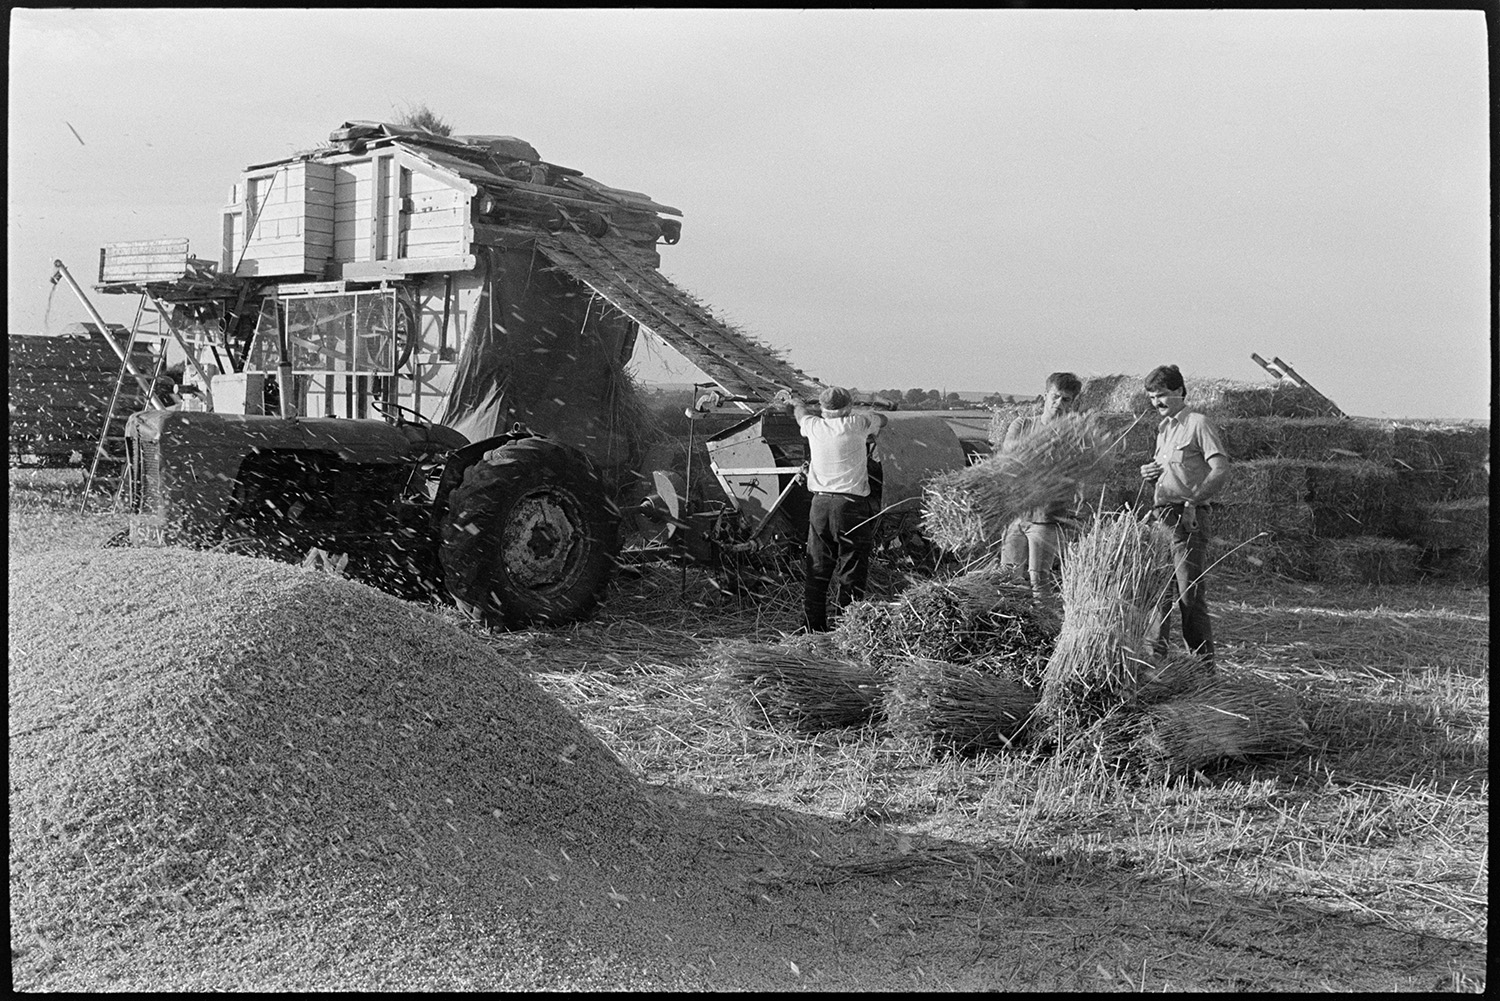 Reedcombers having tea break and working reed comber. 
[Men, possibly from the Down family, reed combing in a field at Spittle Farm, Chulmleigh. Two men in the foreground at stacking bundles of reed from the comber by a large pile of grain. Stacks of hay bales can also be seen in the background.]